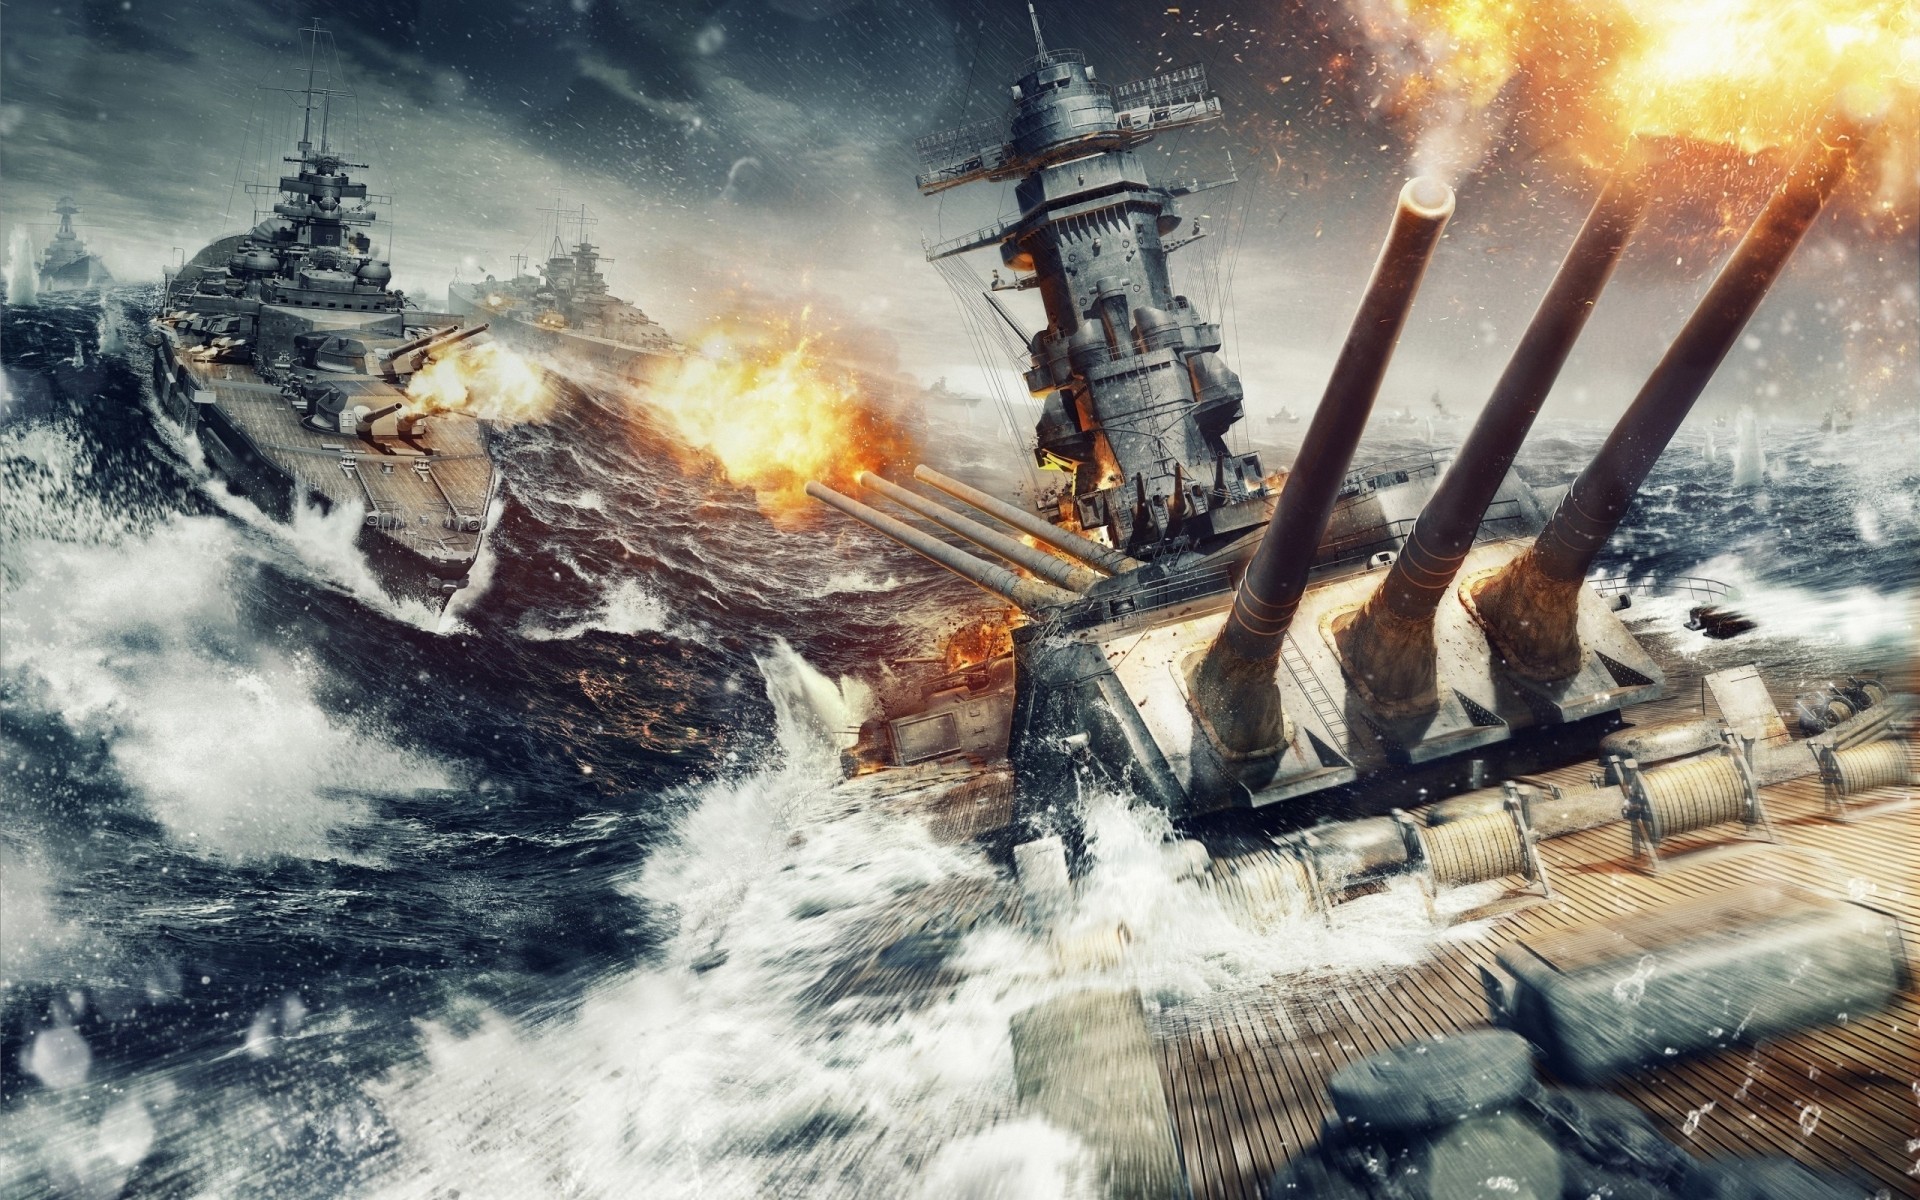 other games vehicle flame smoke watercraft military war transportation system calamity world of warships fire ships